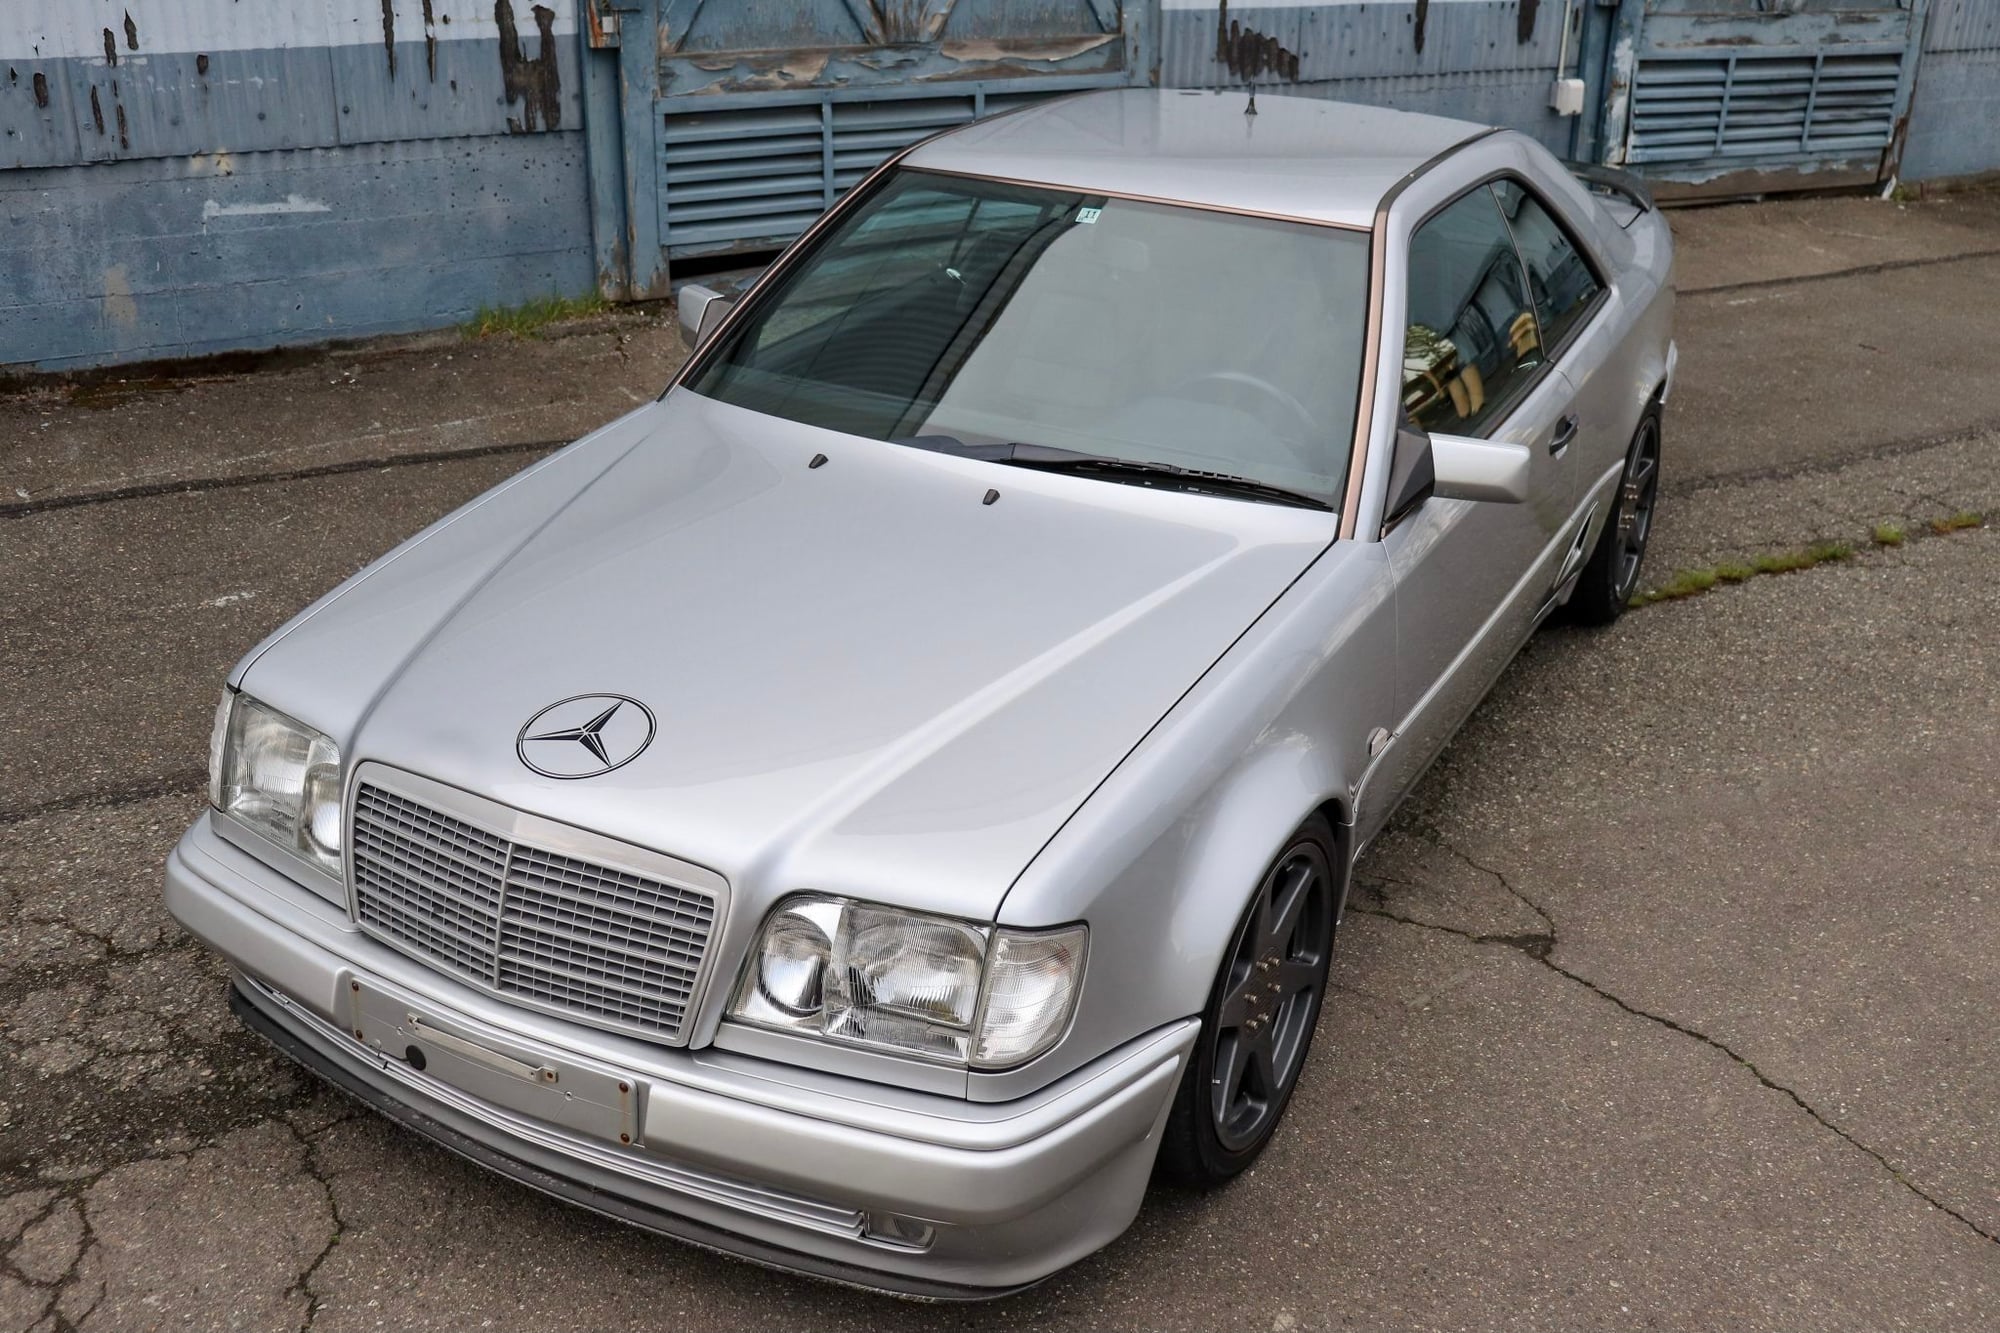 1991 Mercedes-Benz 300CE - 300CR Mosselman Twin Turbo for Sale - Used - VIN WDB1240511B665665 - 24,000 Miles - 6 cyl - 2WD - Manual - Coupe - Silver - Seattle, WA 98107, United States